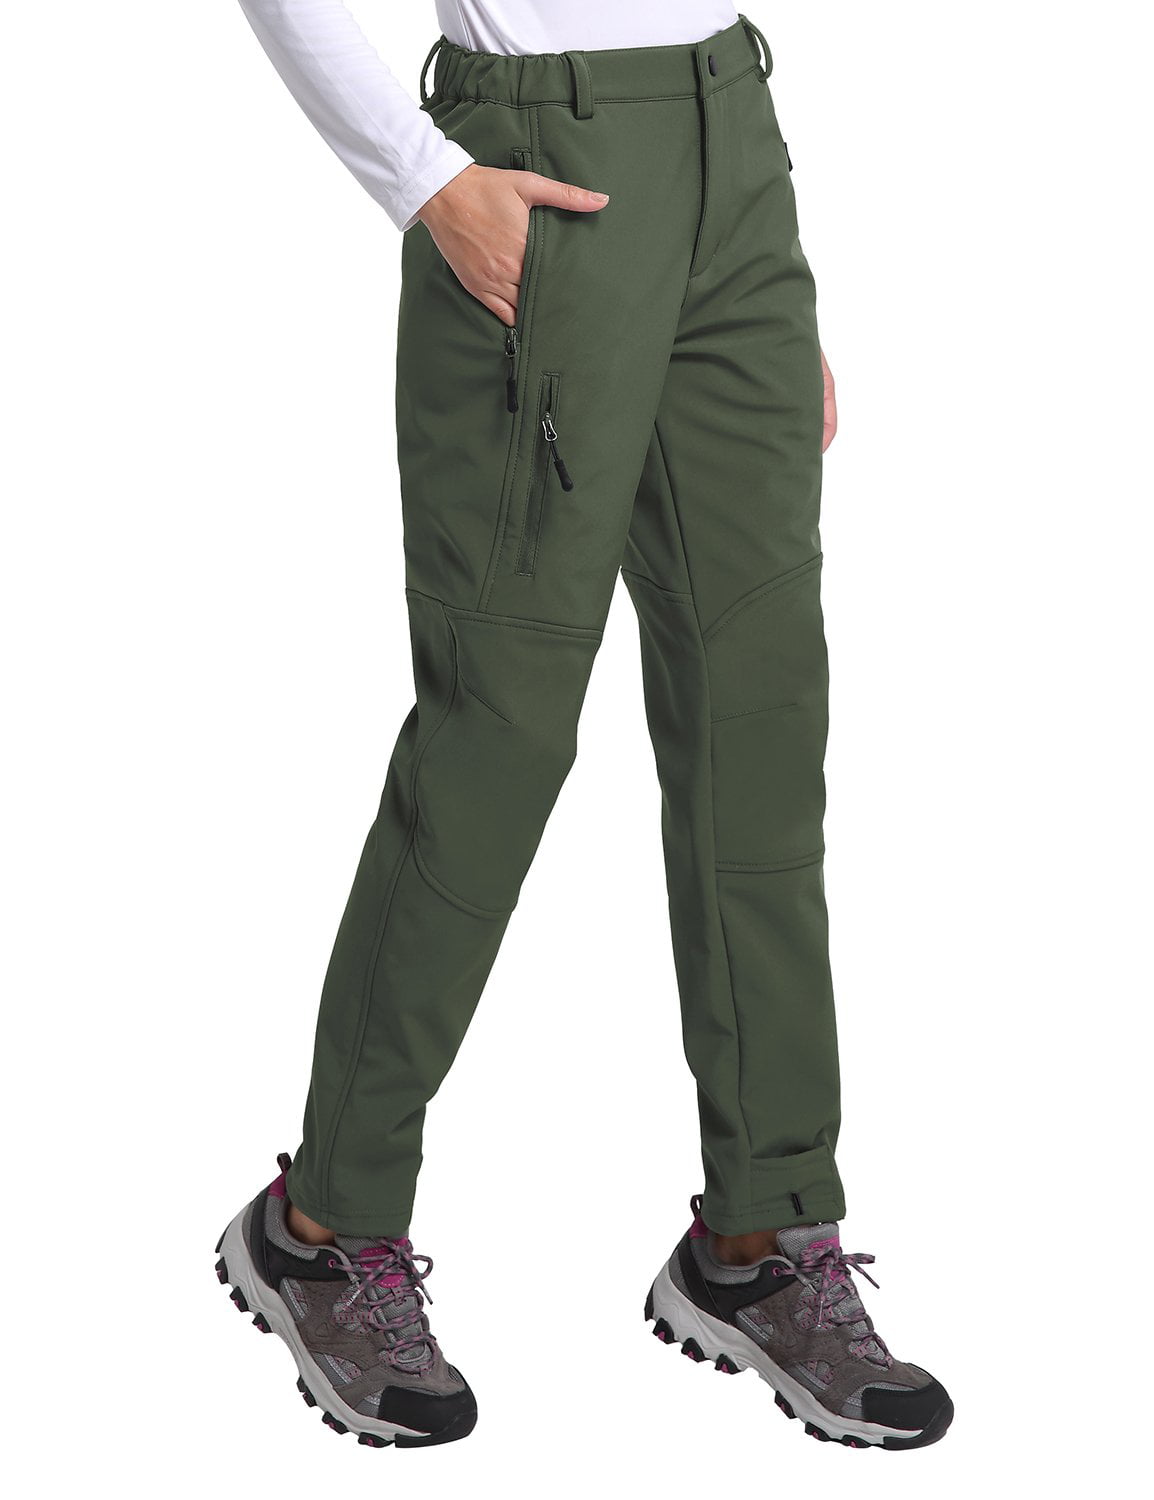 Nonwe Womens Outdoor Water-Resistant Warmth Fleece Lined Climbing Ski Snow Pants 